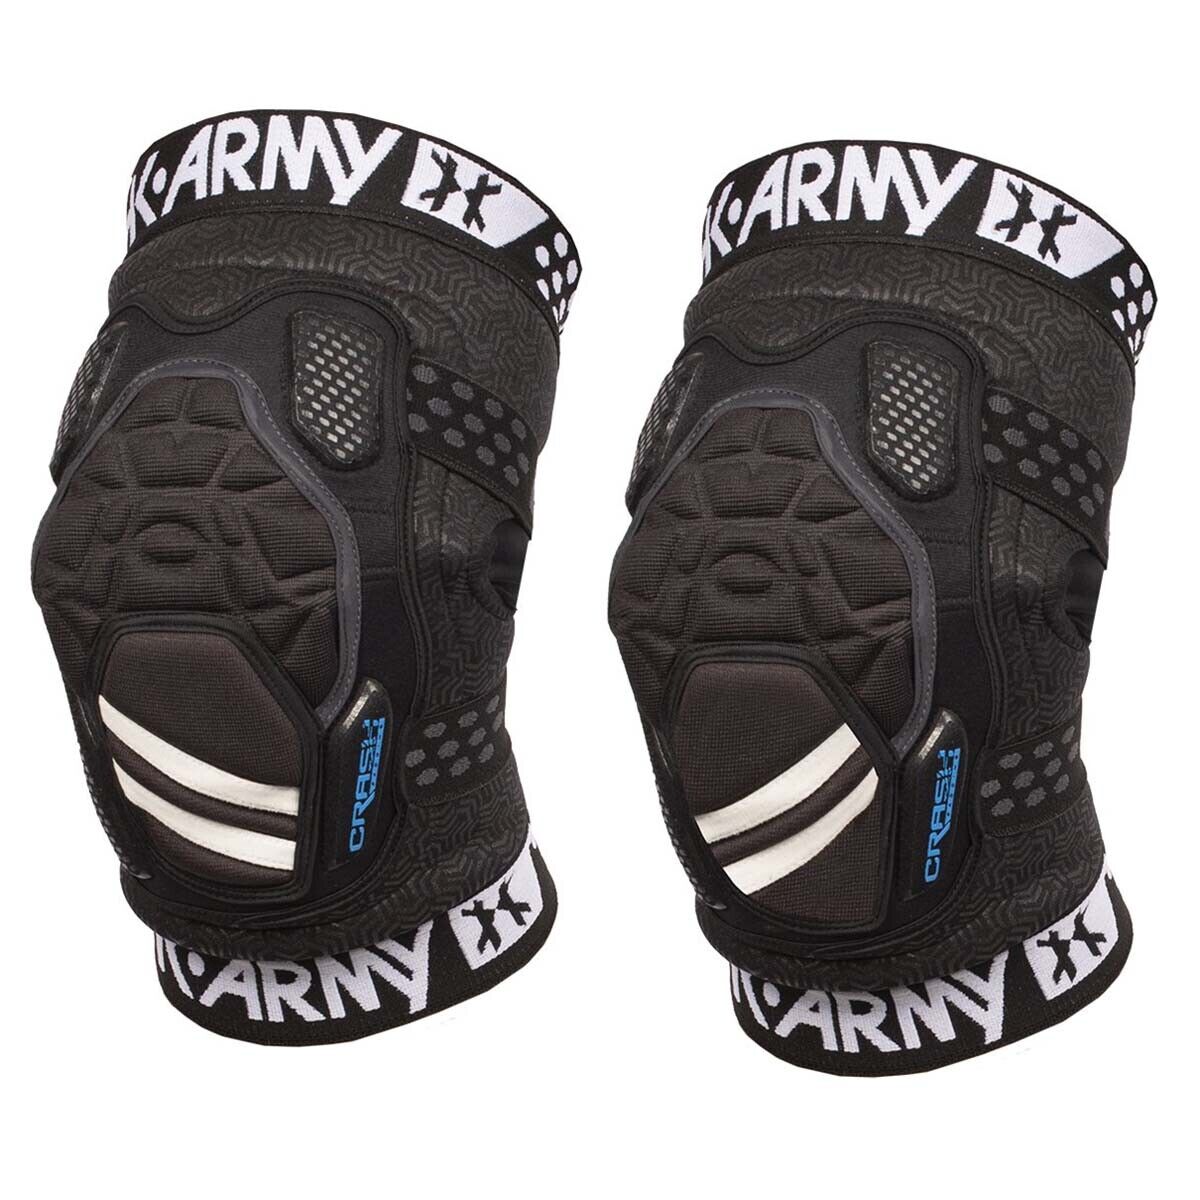 Hk Army Ctx Knee Pads - Black / Blue Size: Small